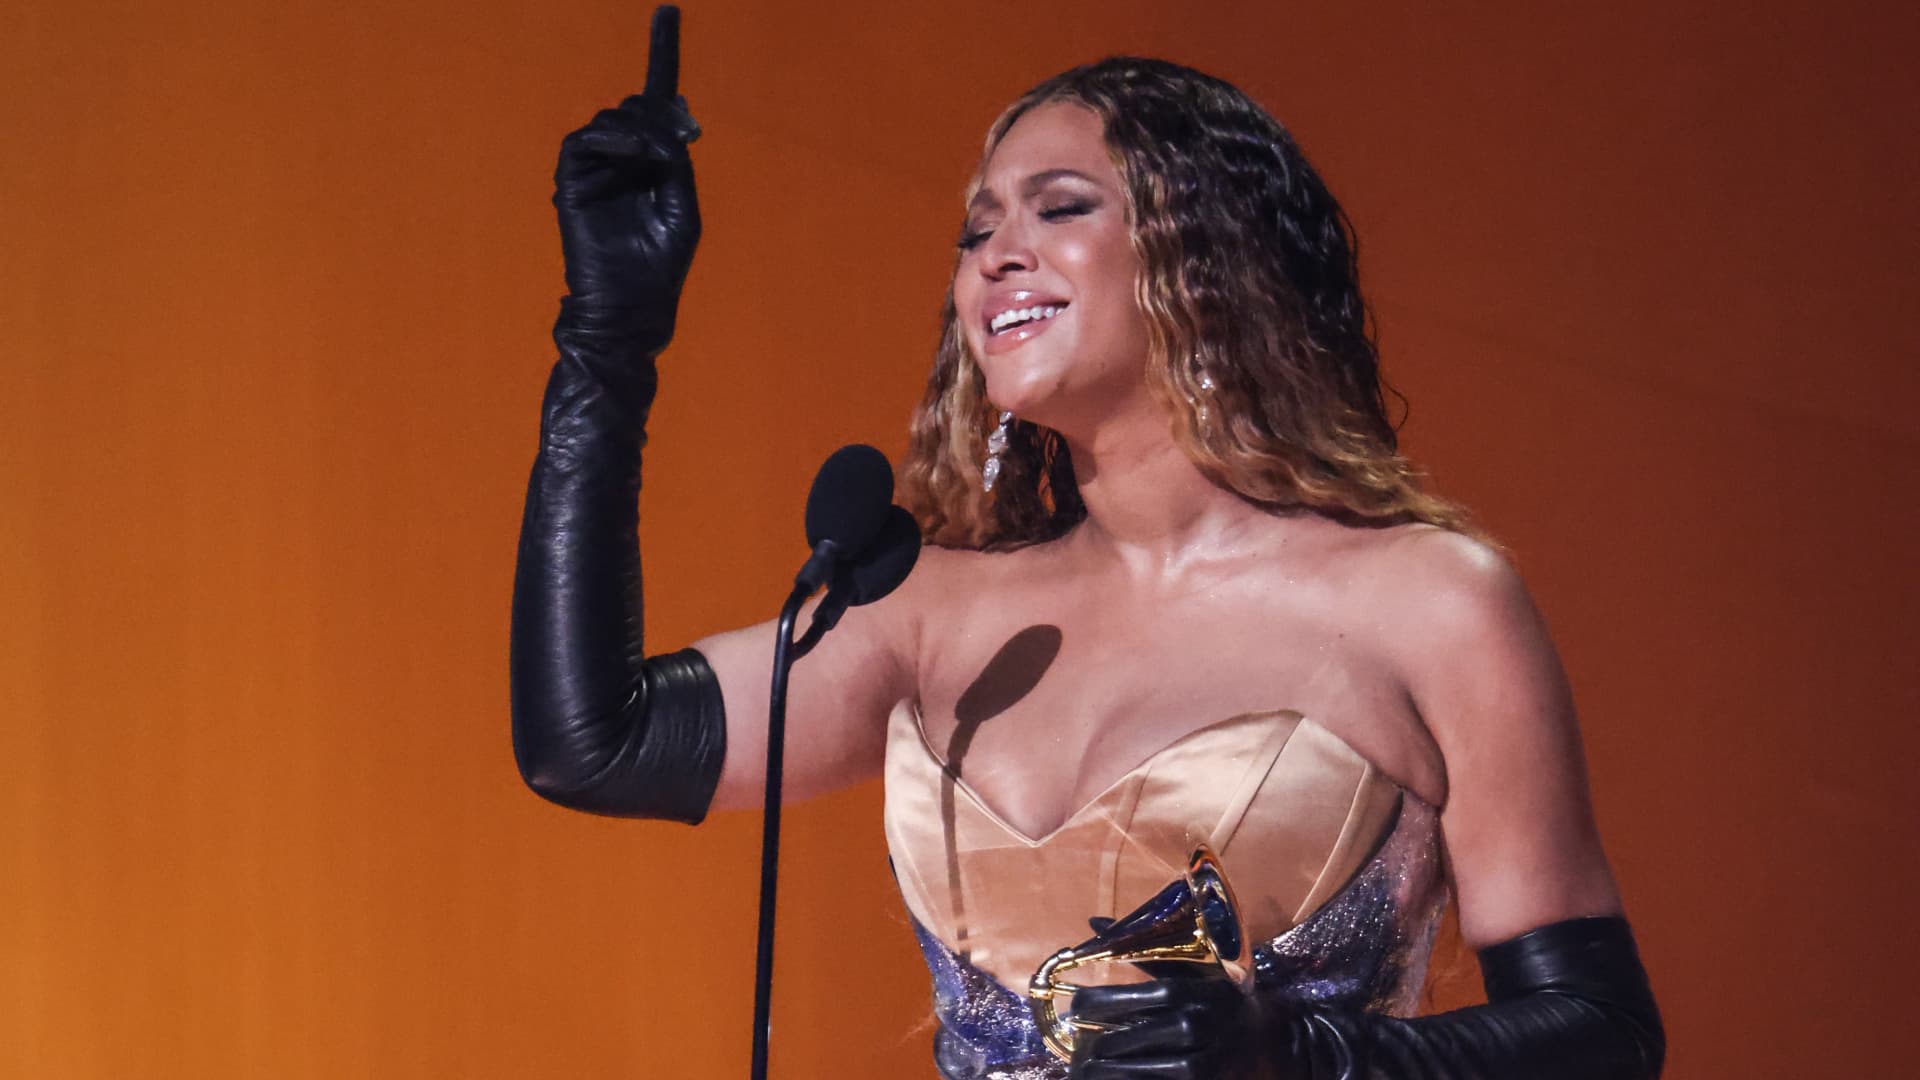 LOS ANGELES, CALIFORNIAFEBRUARY 5: Beyonce accepts the Best Dance/Electronic Music Album award for Renaissance onstage during the 65th GRAMMY Awards at Crypto.com Arena on February 05, 2023 in Los Angeles, California. (Photo by Robert Gauthier / Los Angeles Times via Getty Images)